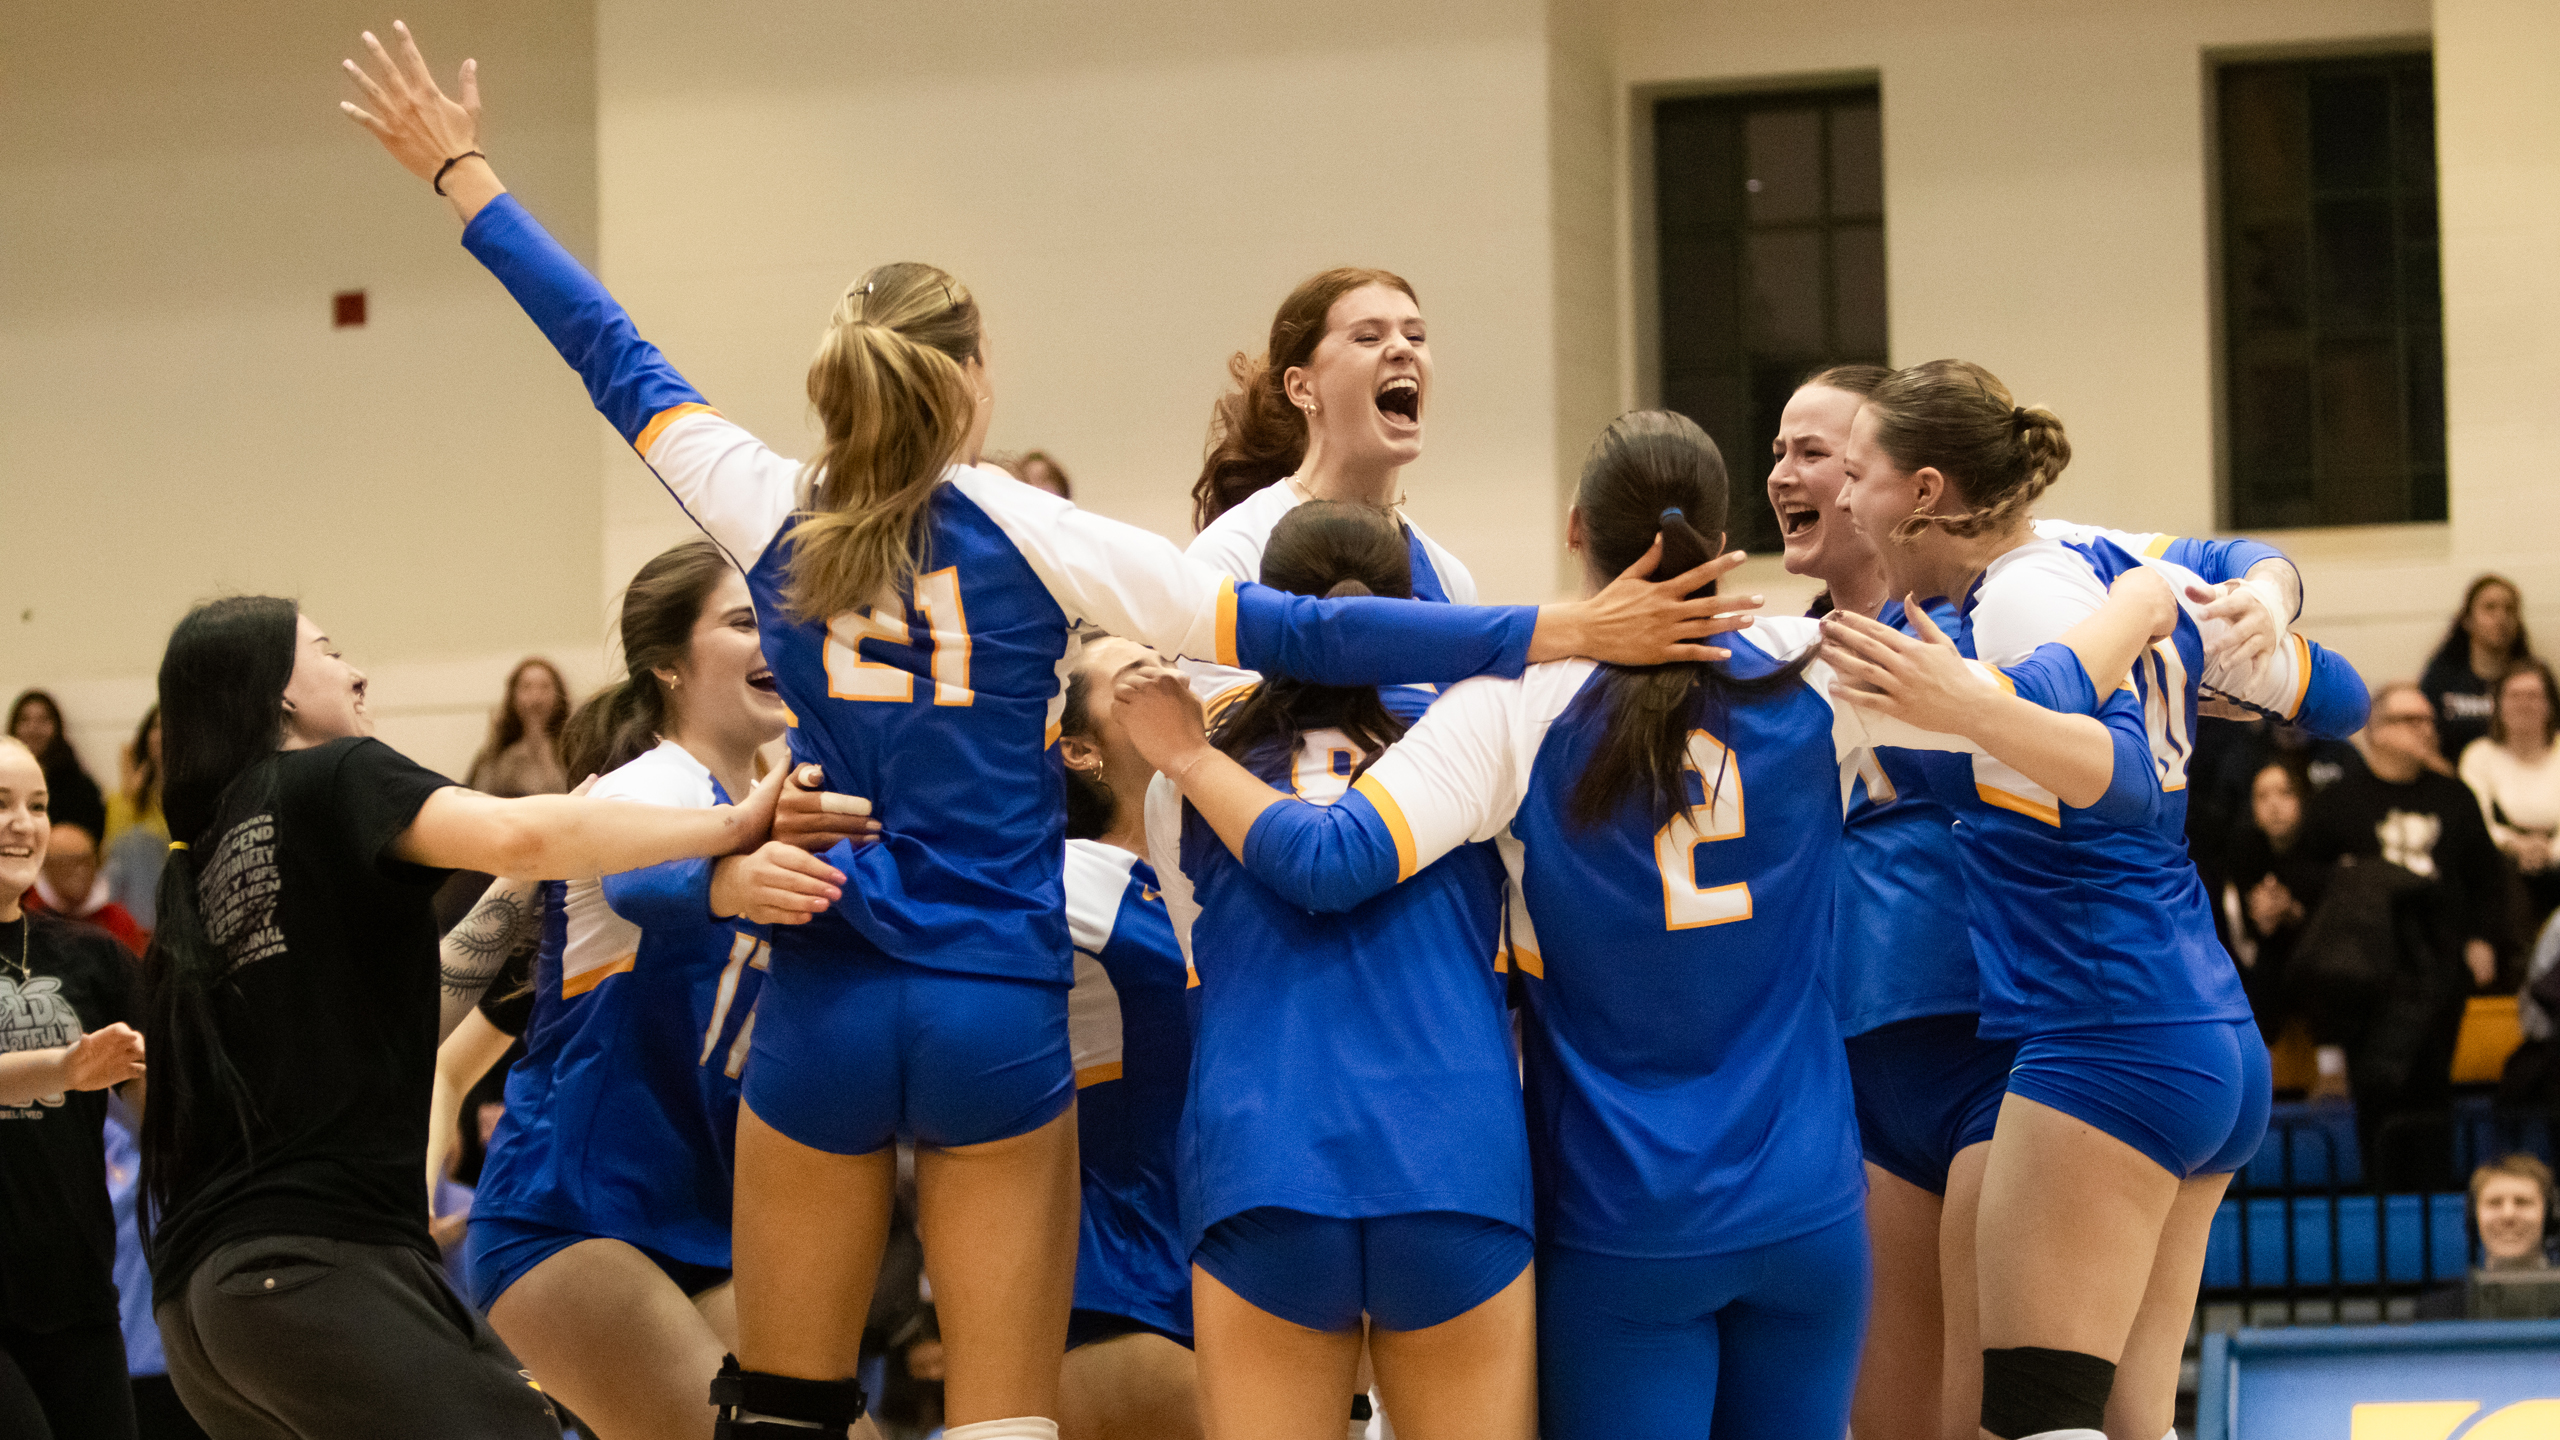 The TMU Bold women's volleyball team jumps together in a huddle after winning